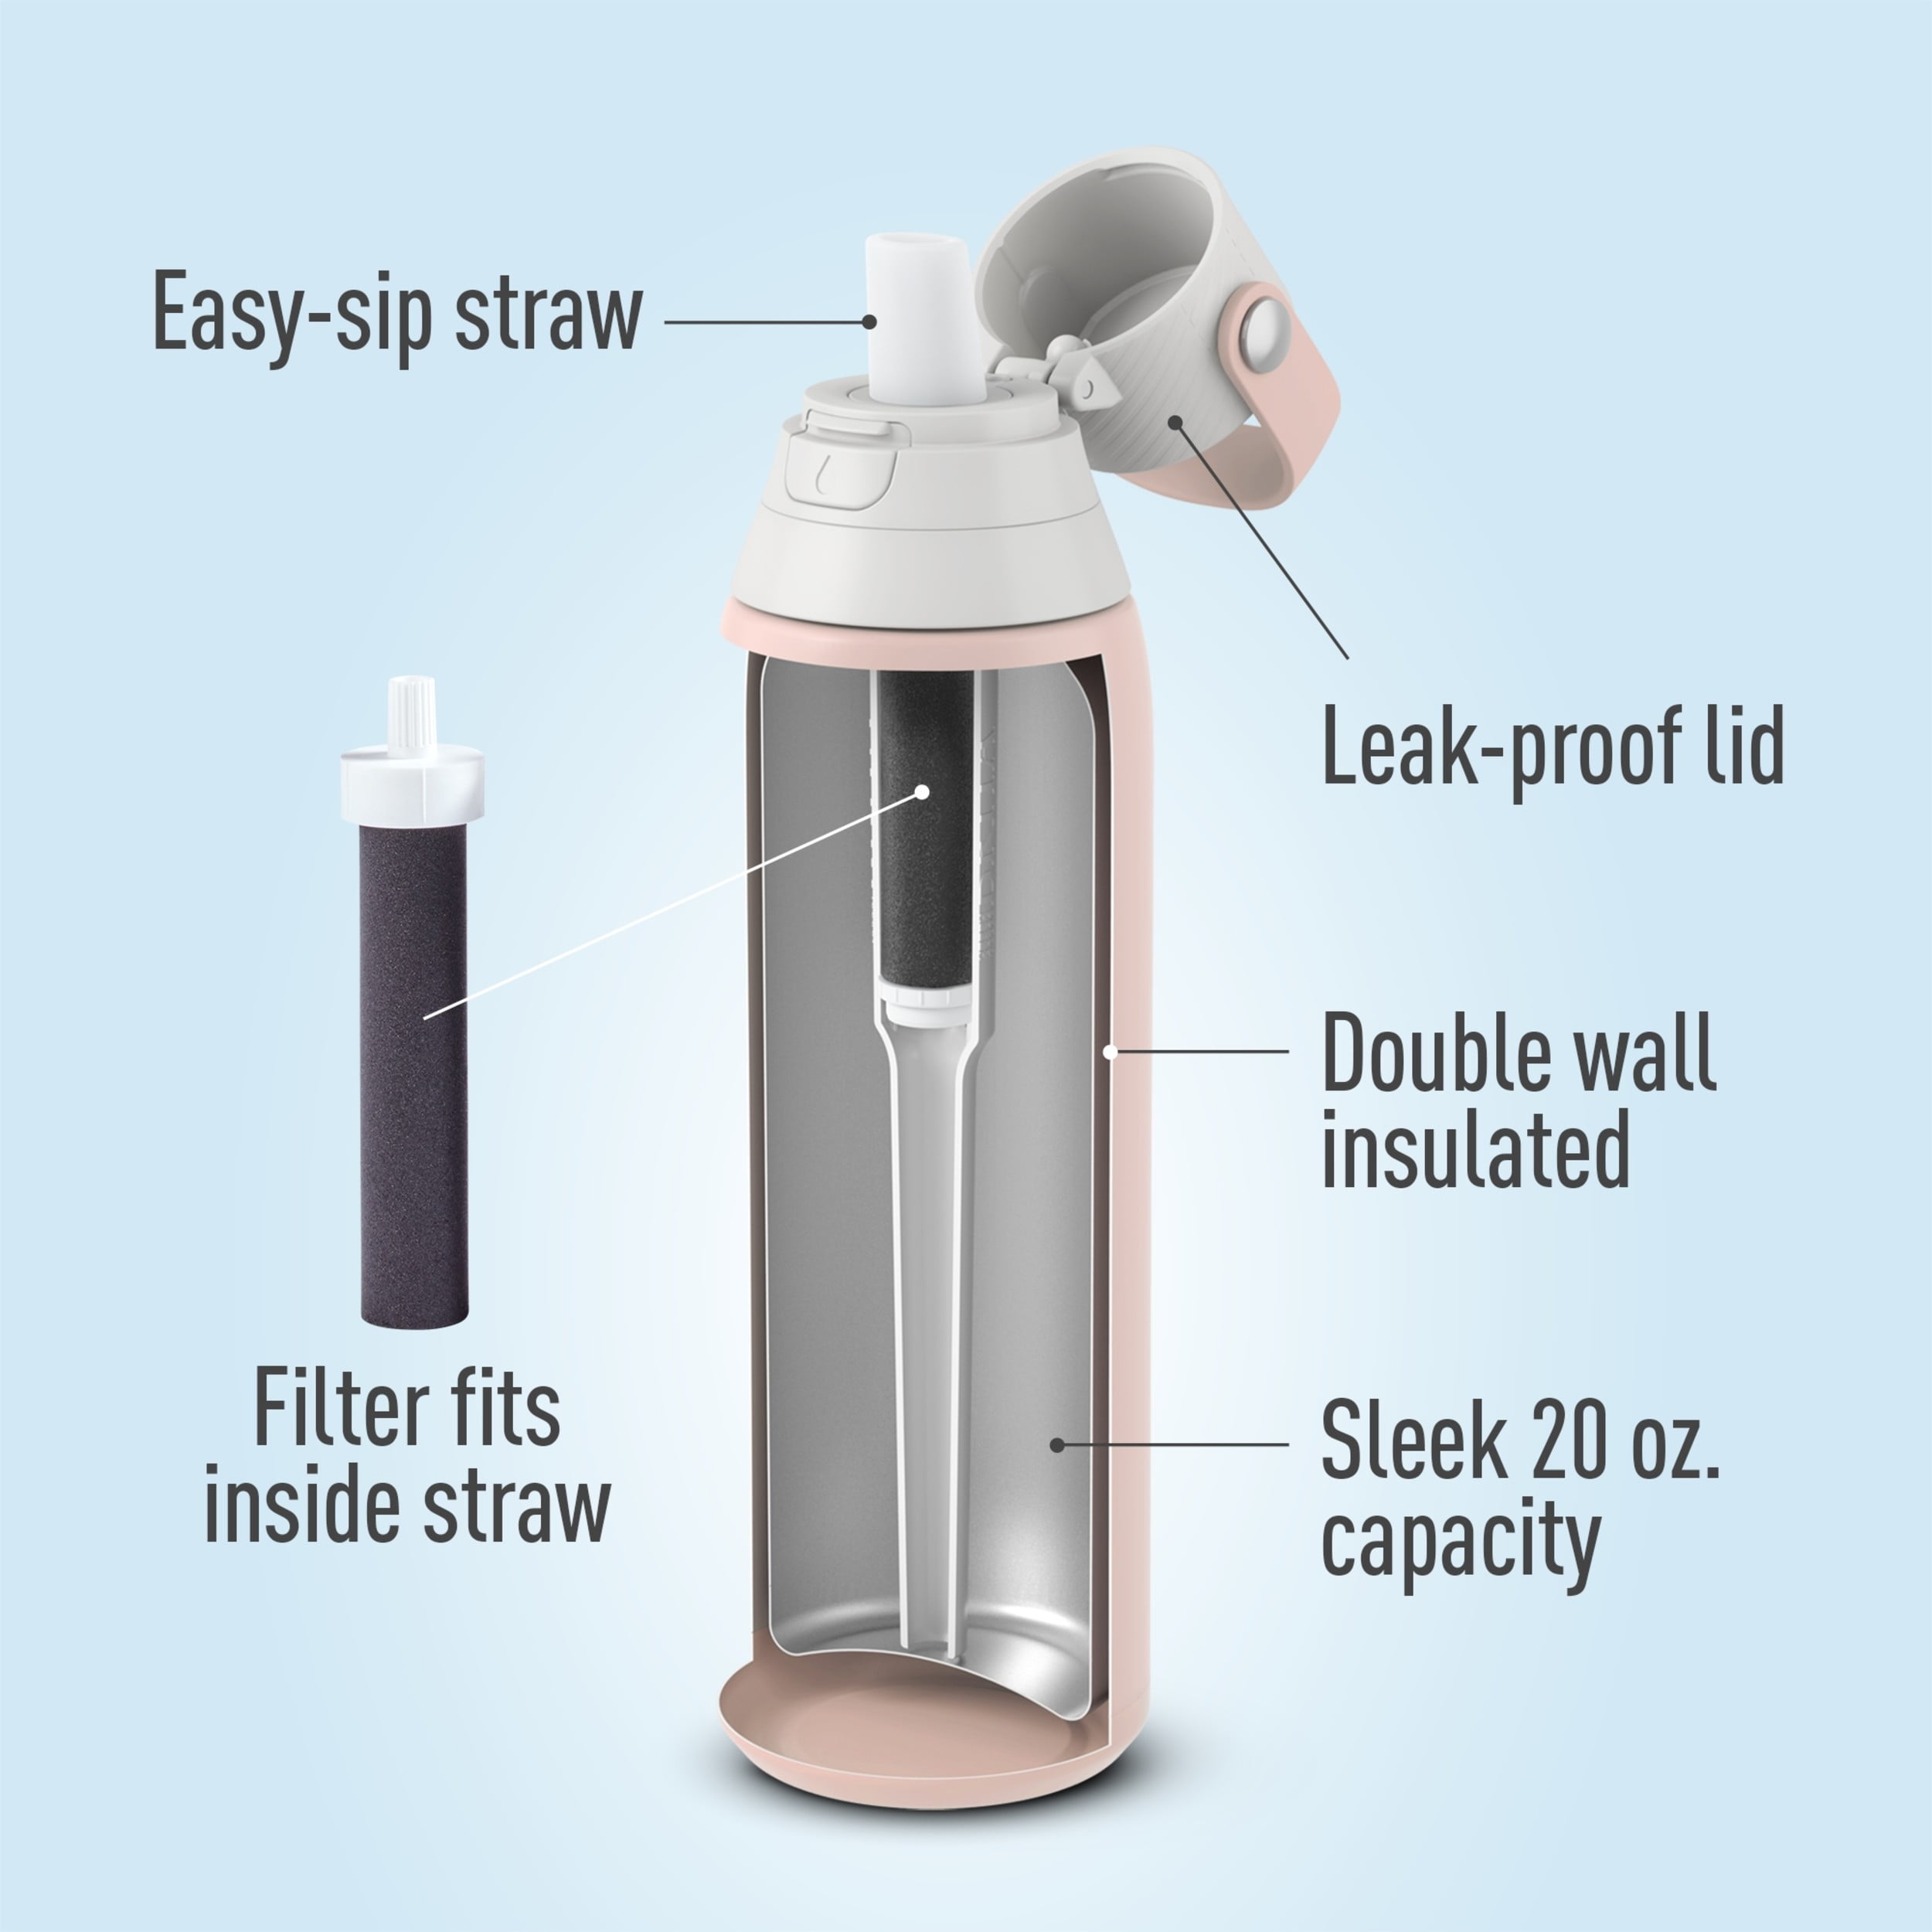 Brita Insulated Filtered Water Bottle with Straw, Reusable, BPA Free  Plastic, Se